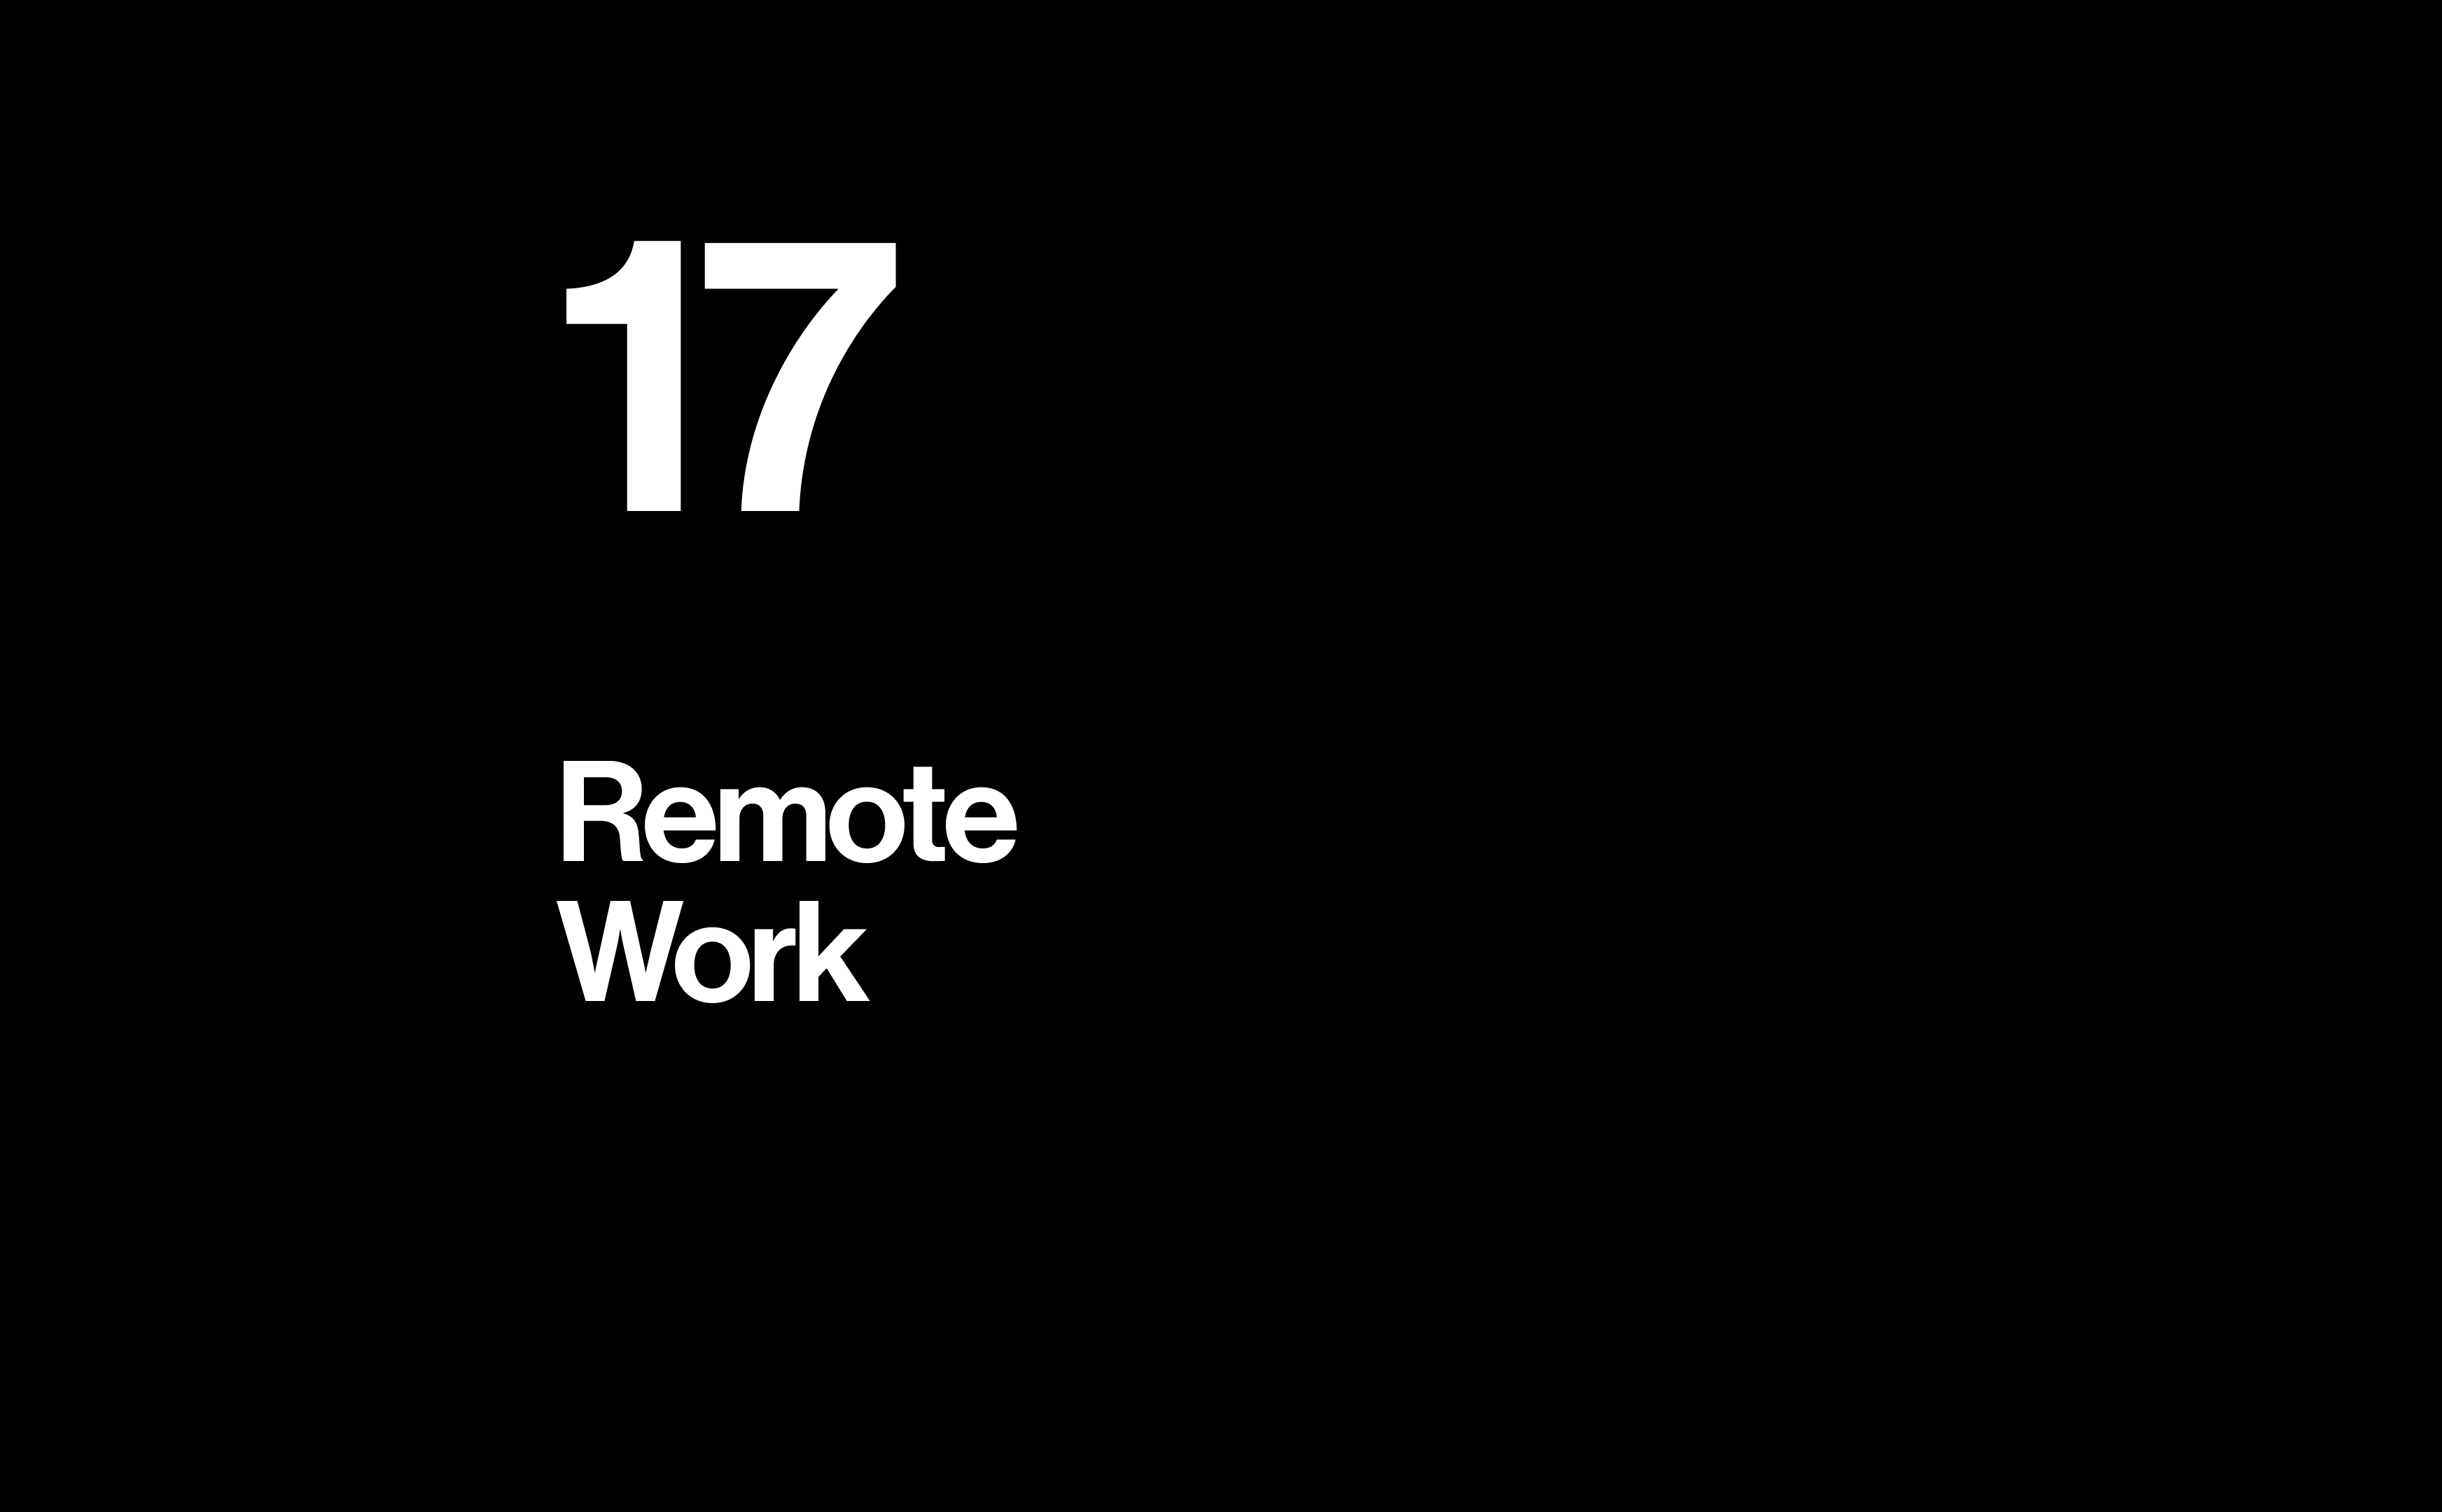 Remote work and travel tips for designers